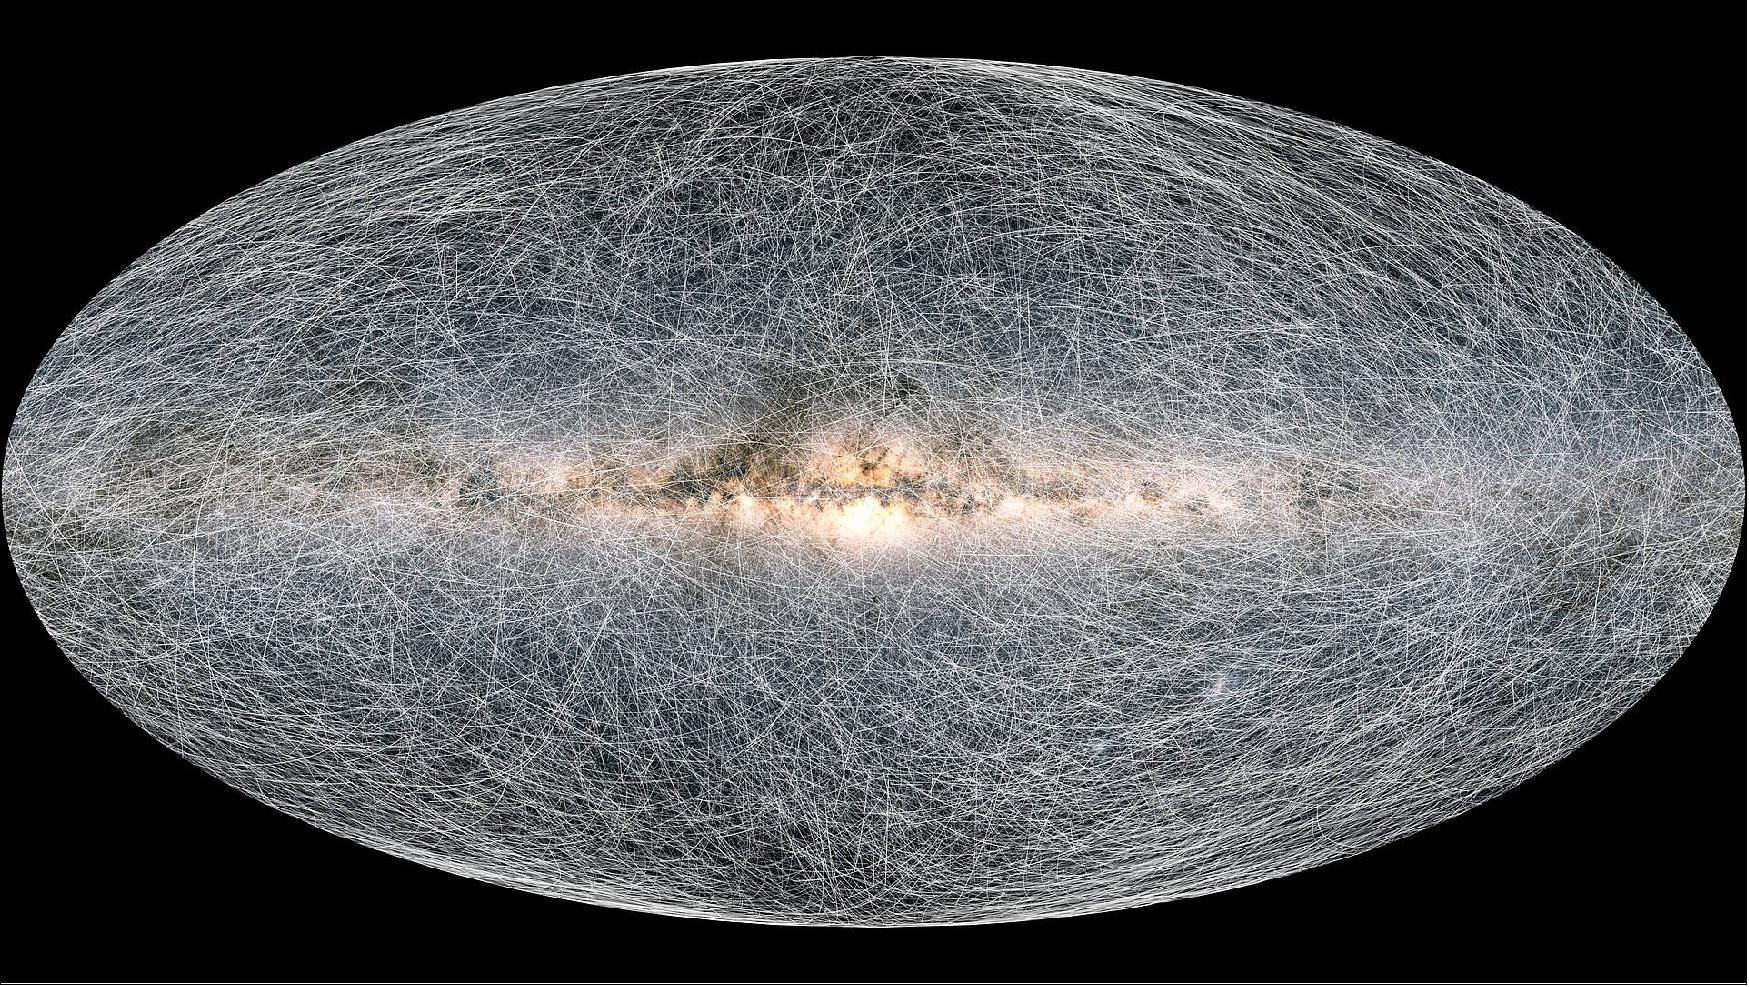 Figure 48: Gaia’s stellar motion for the next 400 thousand years. The stars are in constant motion. To the human eye this movement – known as proper motion – is imperceptible, but Gaia is measuring it with more and more precision. The trails on this image show how 40,000 stars, all located within 100 parsecs (326 light years) of the Solar System, will move across the sky in the next 400 thousand years. These proper motions are released as part of the Gaia Early Data Release 3 (Gaia EDR3). They are twice as precise as the proper motions released in the previous Gaia DR2. The increase in precision is because Gaia has now measured the stars more times and over a longer interval of time. This represents a major improvement in Gaia EDR3 with respect to Gaia DR2 (image credit: ESA/Gaia/DPAC; CC BY-SA 3.0 IGO. Acknowledgement: A. Brown, S. Jordan, T. Roegiers, X. Luri, E. Masana, T. Prusti and A. Moitinho)